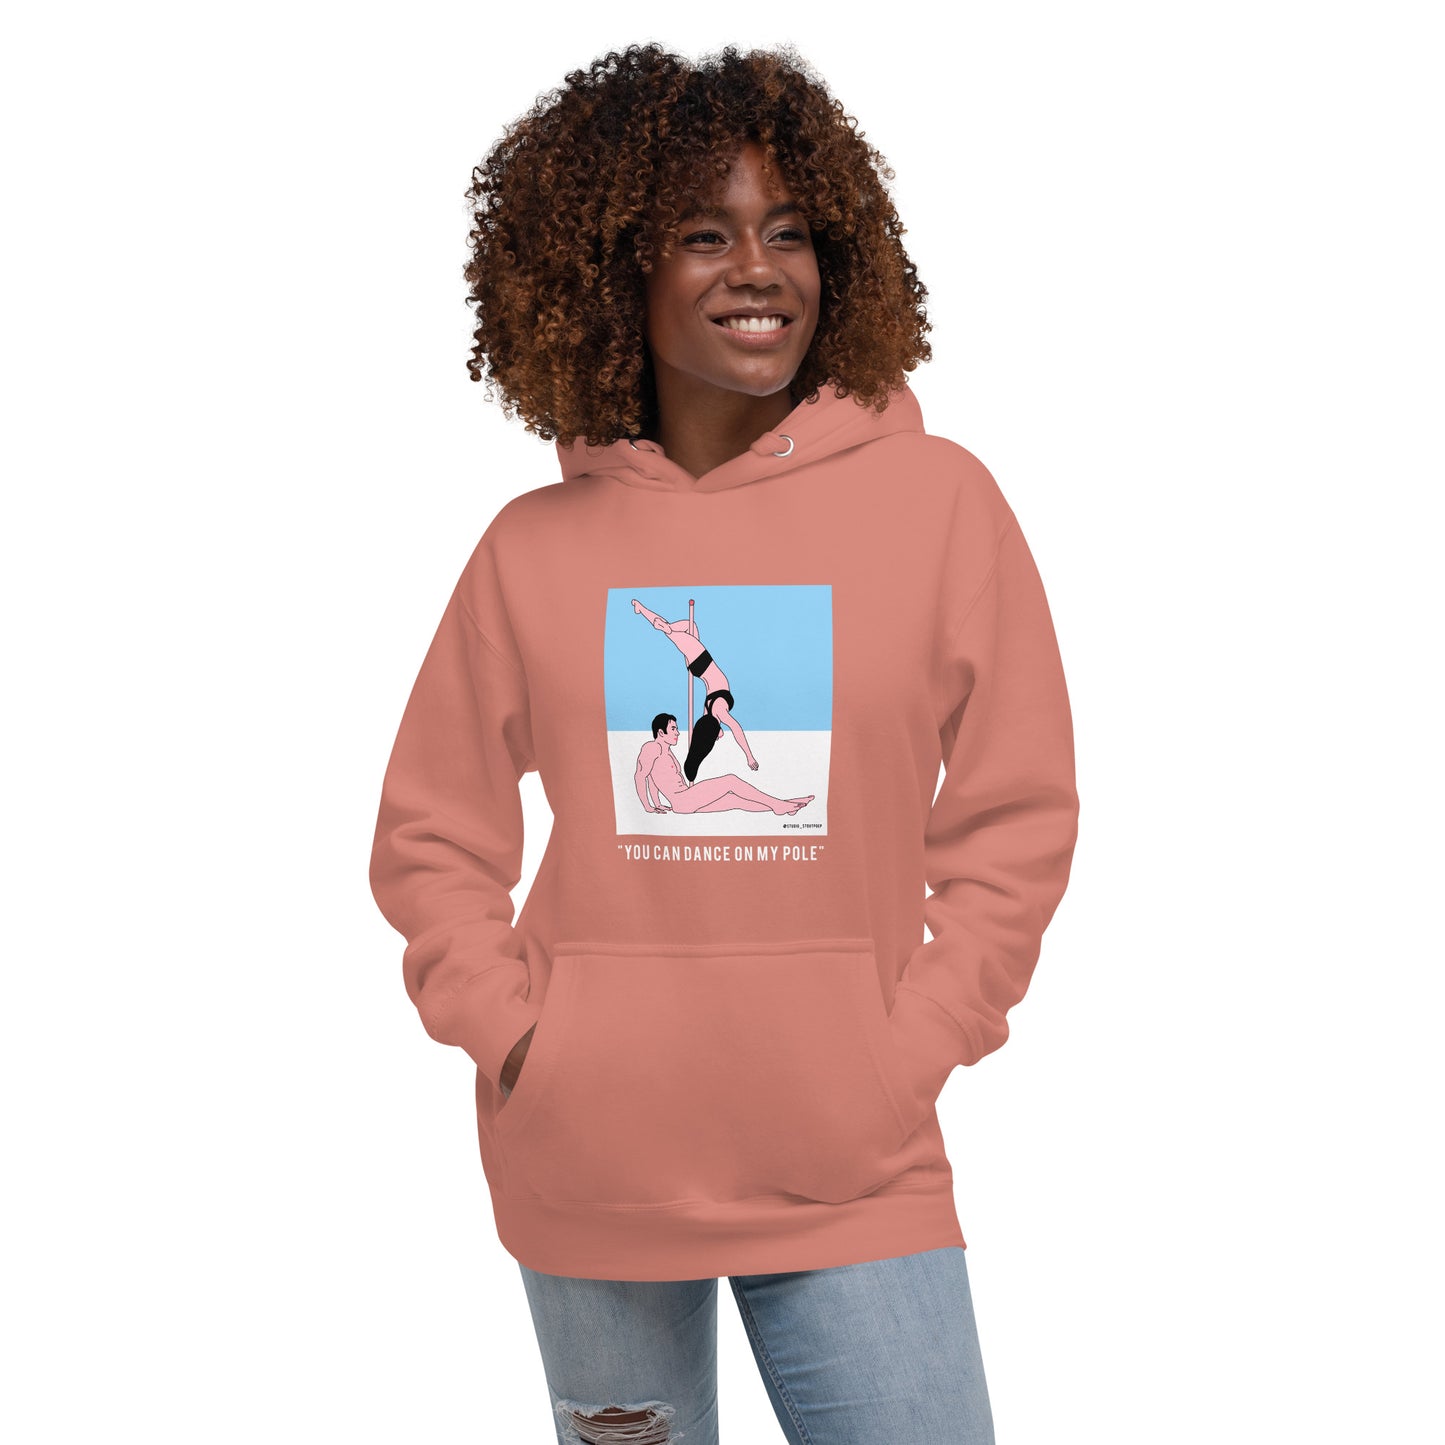 You Can Dance On My Pole - Unisex Hoodie